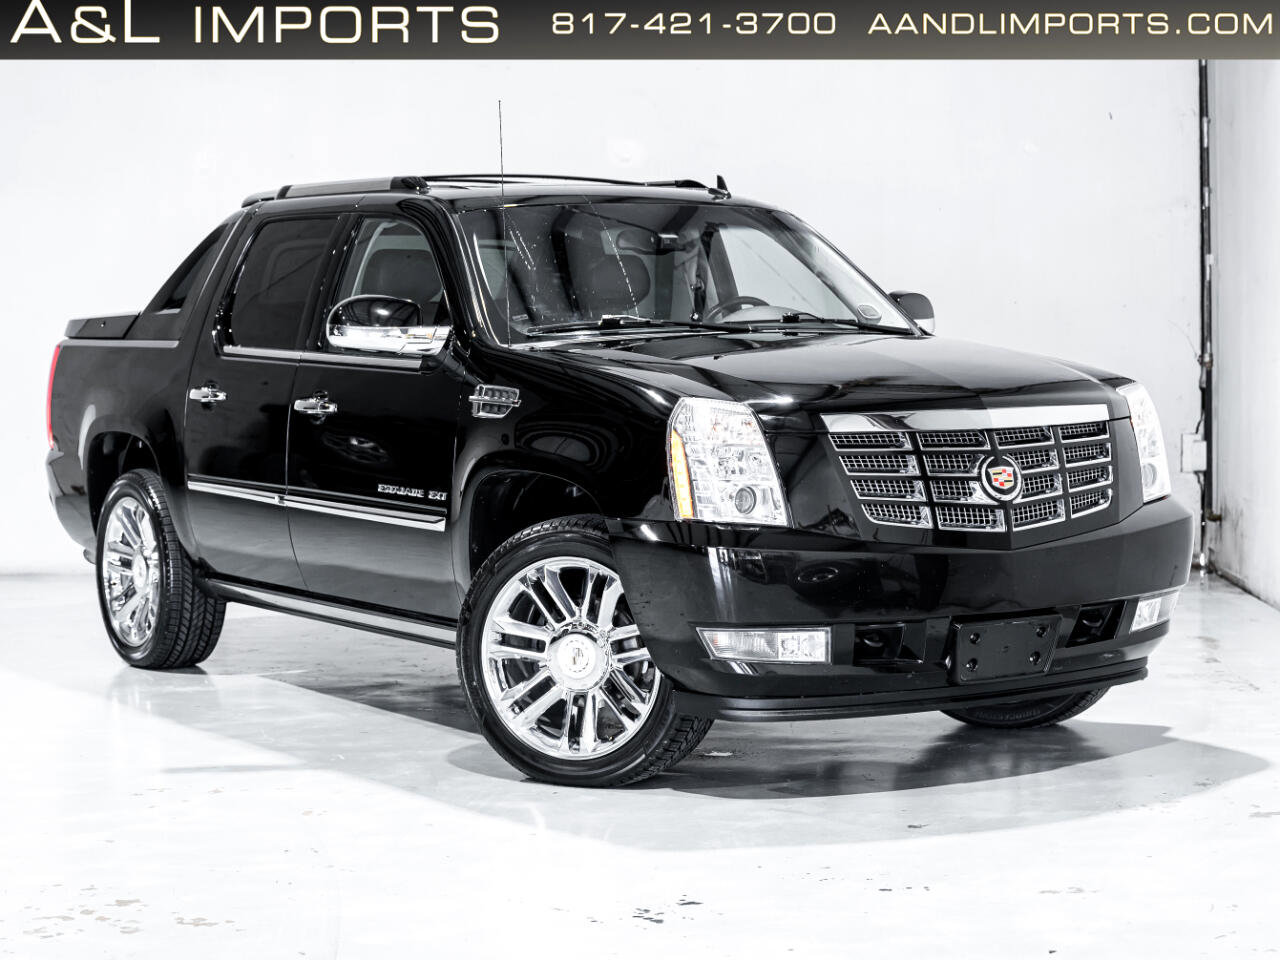 2013 Cadillac Escalade EXT for Sale in Arlington, TX (Test Drive at Home) -  Kelley Blue Book